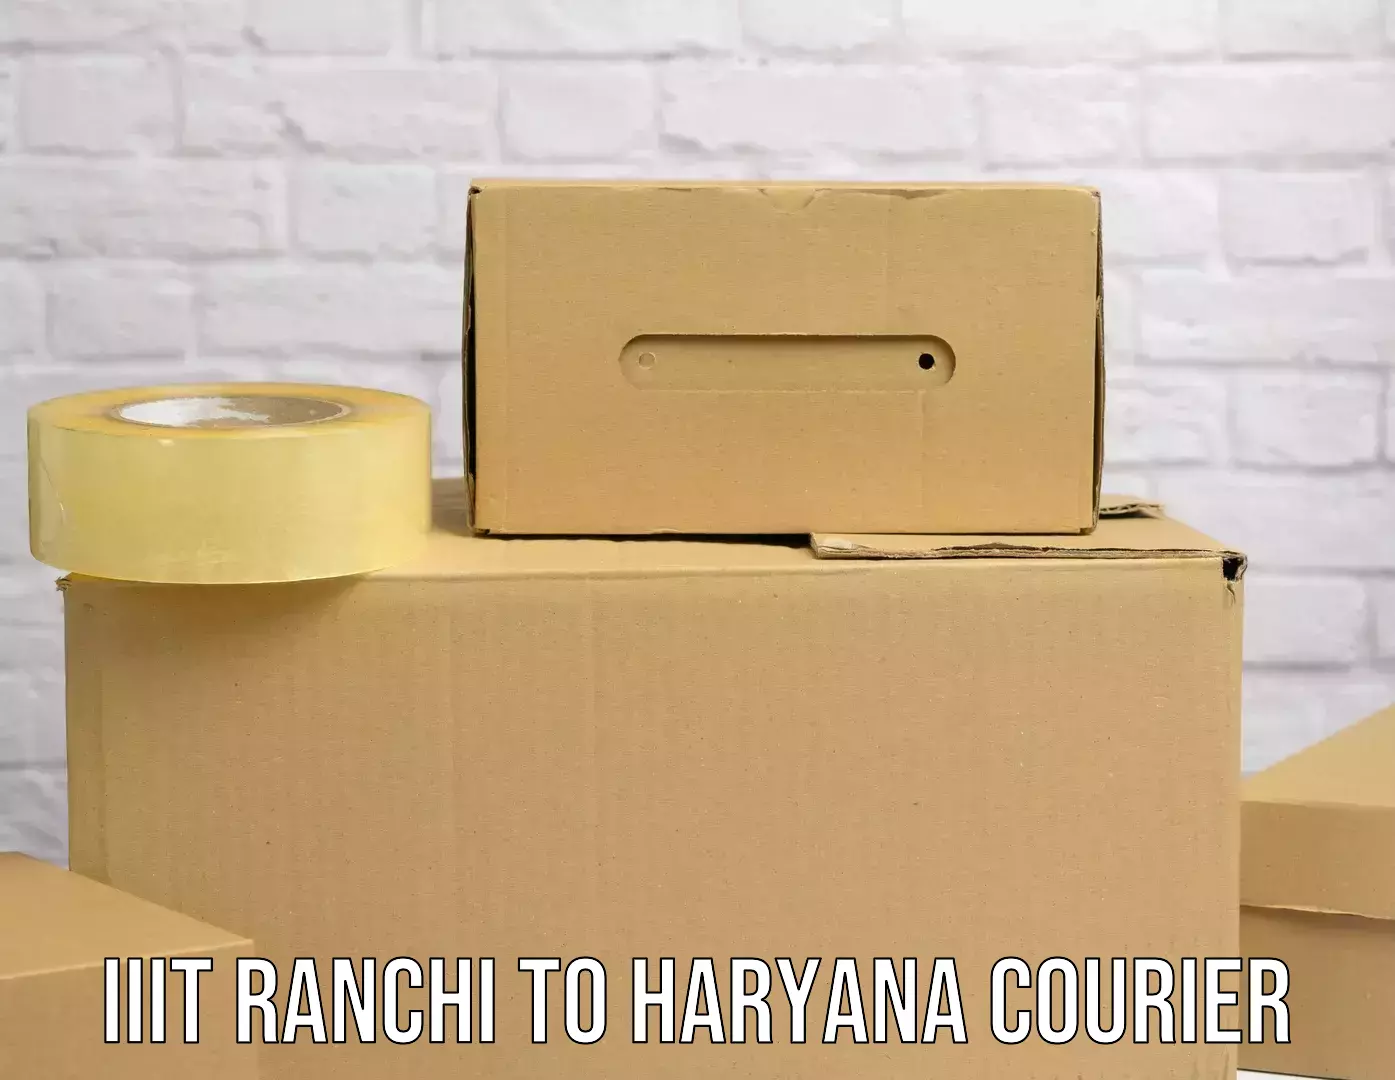 Simplified shipping solutions IIIT Ranchi to Gurgaon